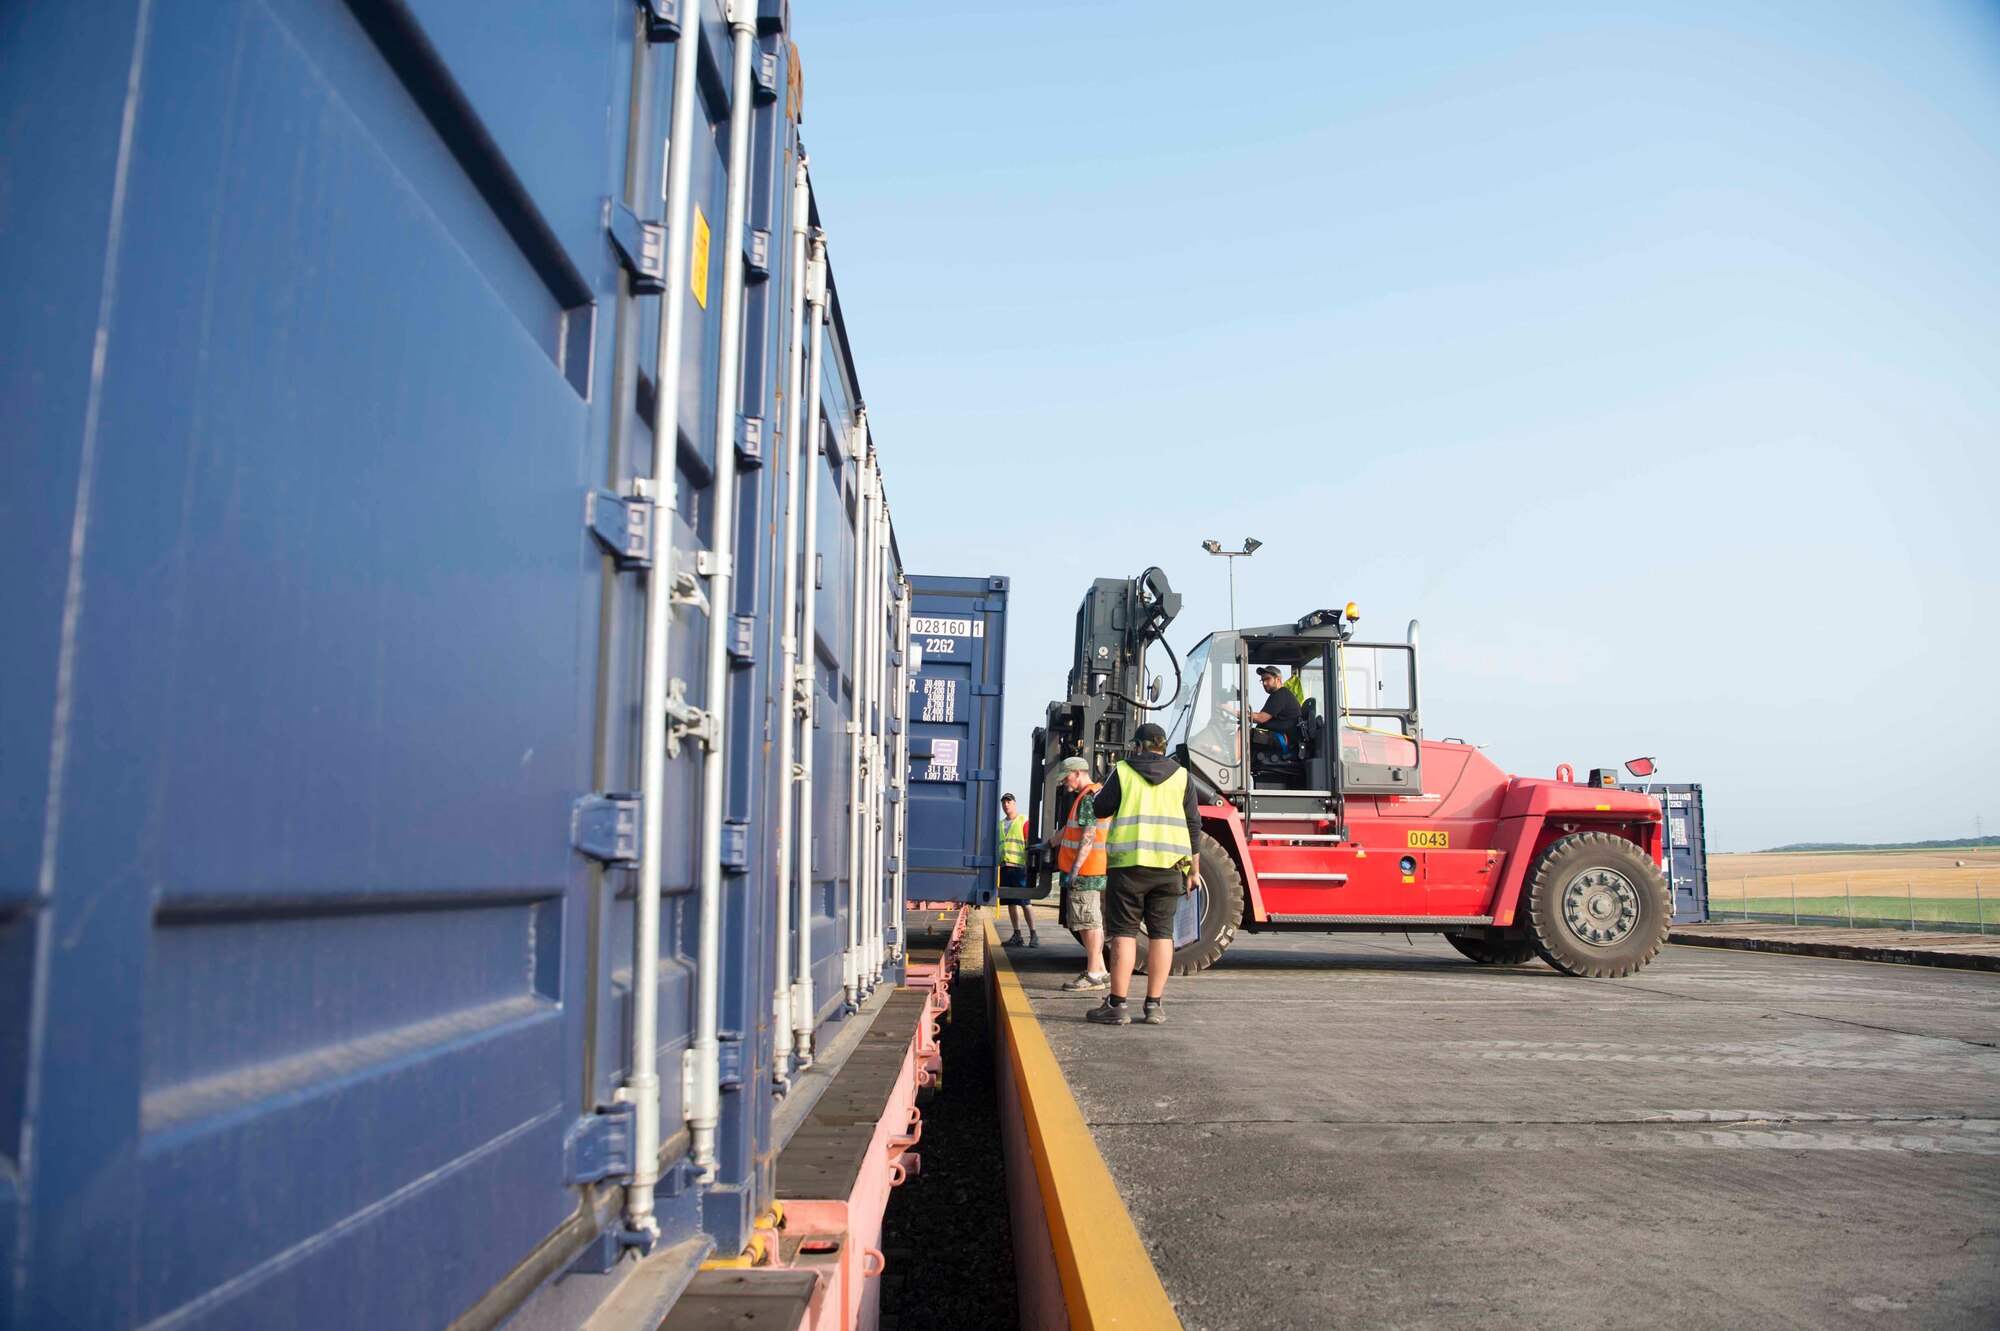 A forklift operator places cargo onto a train car in Sanem, Luxembourg, July 23, 2018. The cargo was used during a Deployable Air Base System construction exercise in Krzesiny Air Base, Poland. An estimated 55 U.S. Air Force and Army personnel deployed to Poland to support the DABS construction, which tested the Air Force's ability to rapidly construct an air base in an austere environment. (U.S. Air Force photo by Senior Airman Elizabeth Baker)